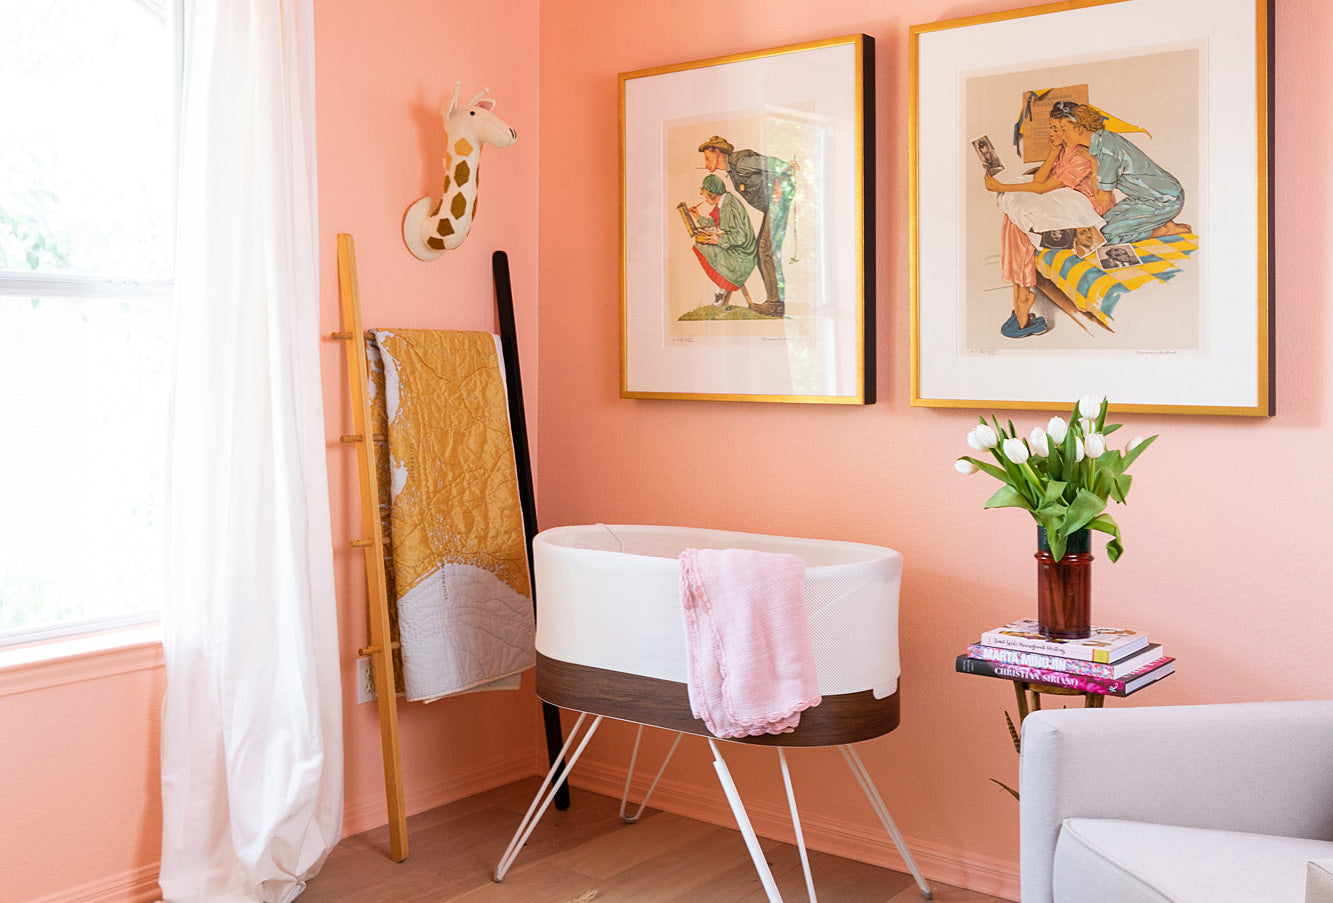 Ideas For A Baby Room: 8 Inspiring Paint Projects | Clare